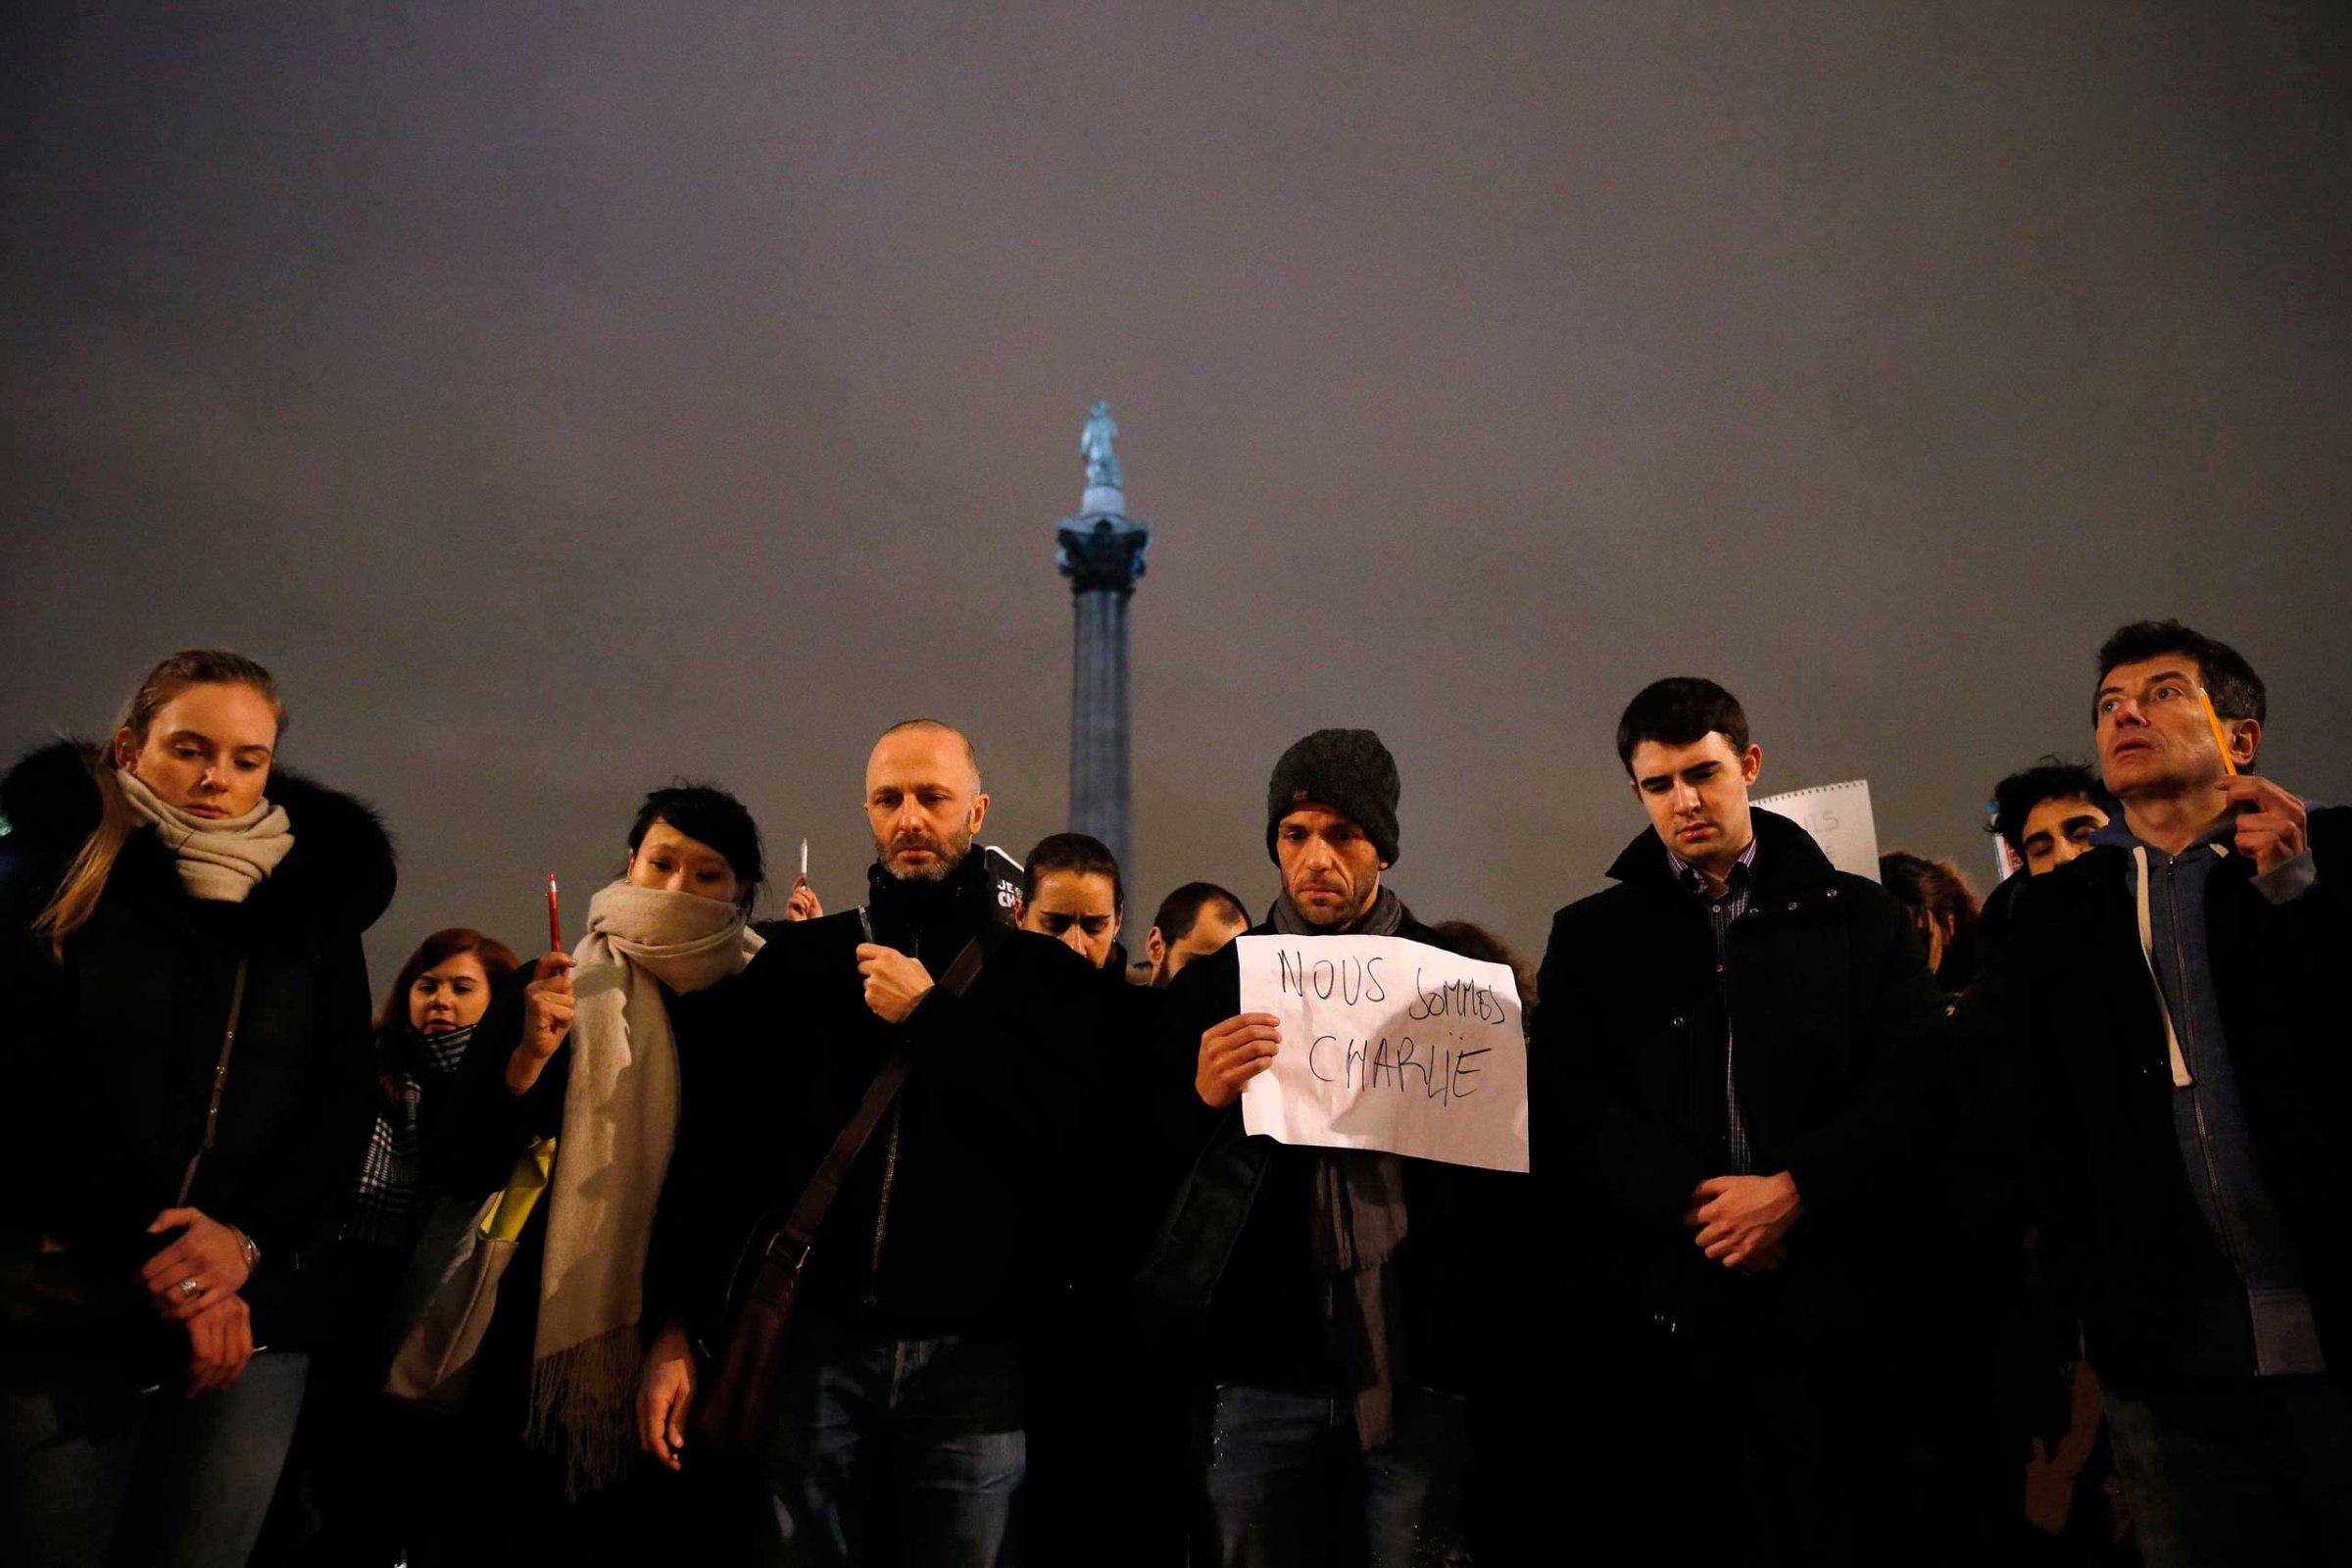 People raise pens and signs during a vigil to pay tribute to the victims of a shooting by gunmen at the offices of weekly satirical magazine Charlie Hebdo in Paris, at Trafalgar Square in London, Jan. 7, 2015.